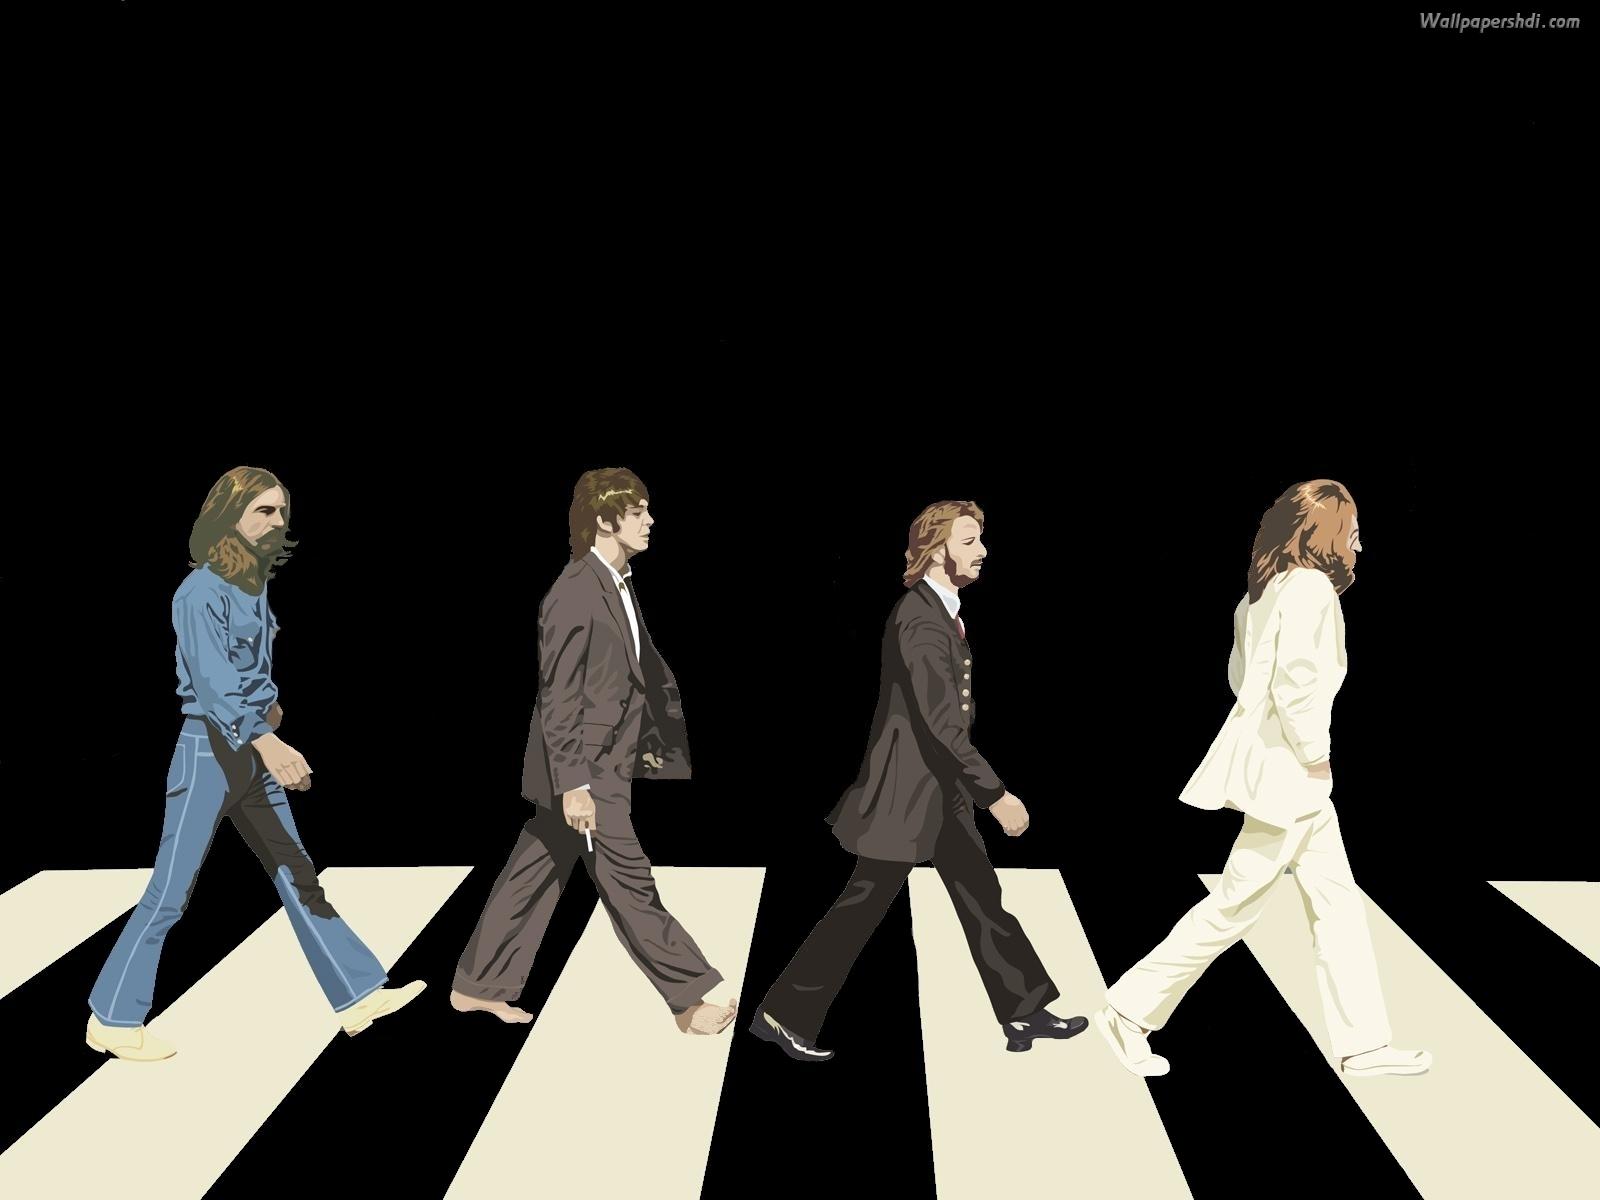 Collection of Abbey Road Wallpapers.